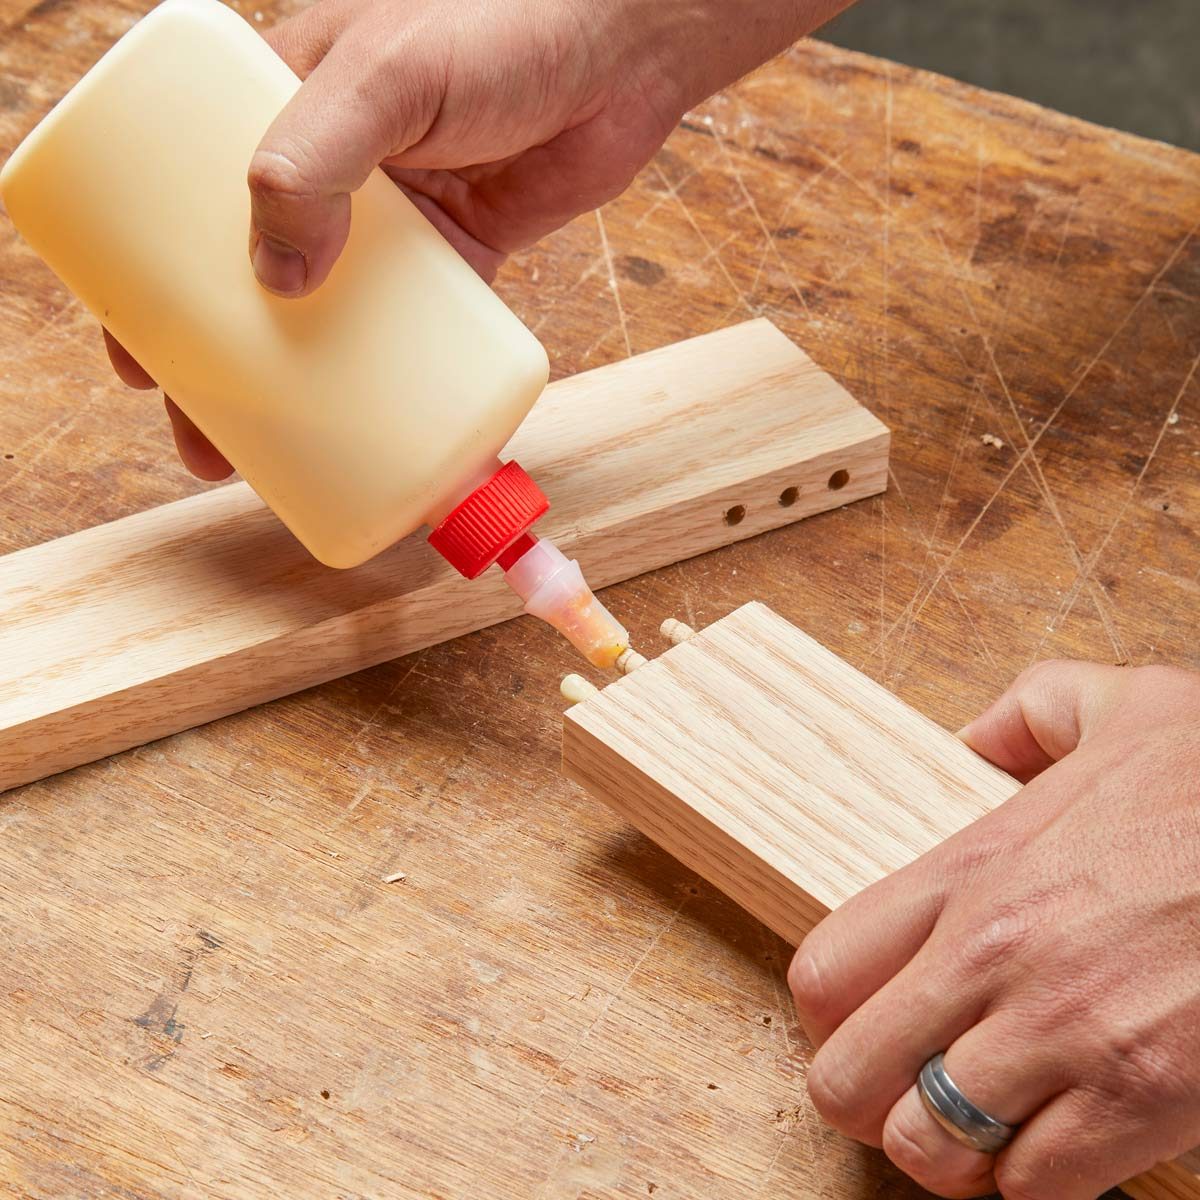 DOWEL JOINERY: Why It's Easy to Love This Great Woodworking Technique